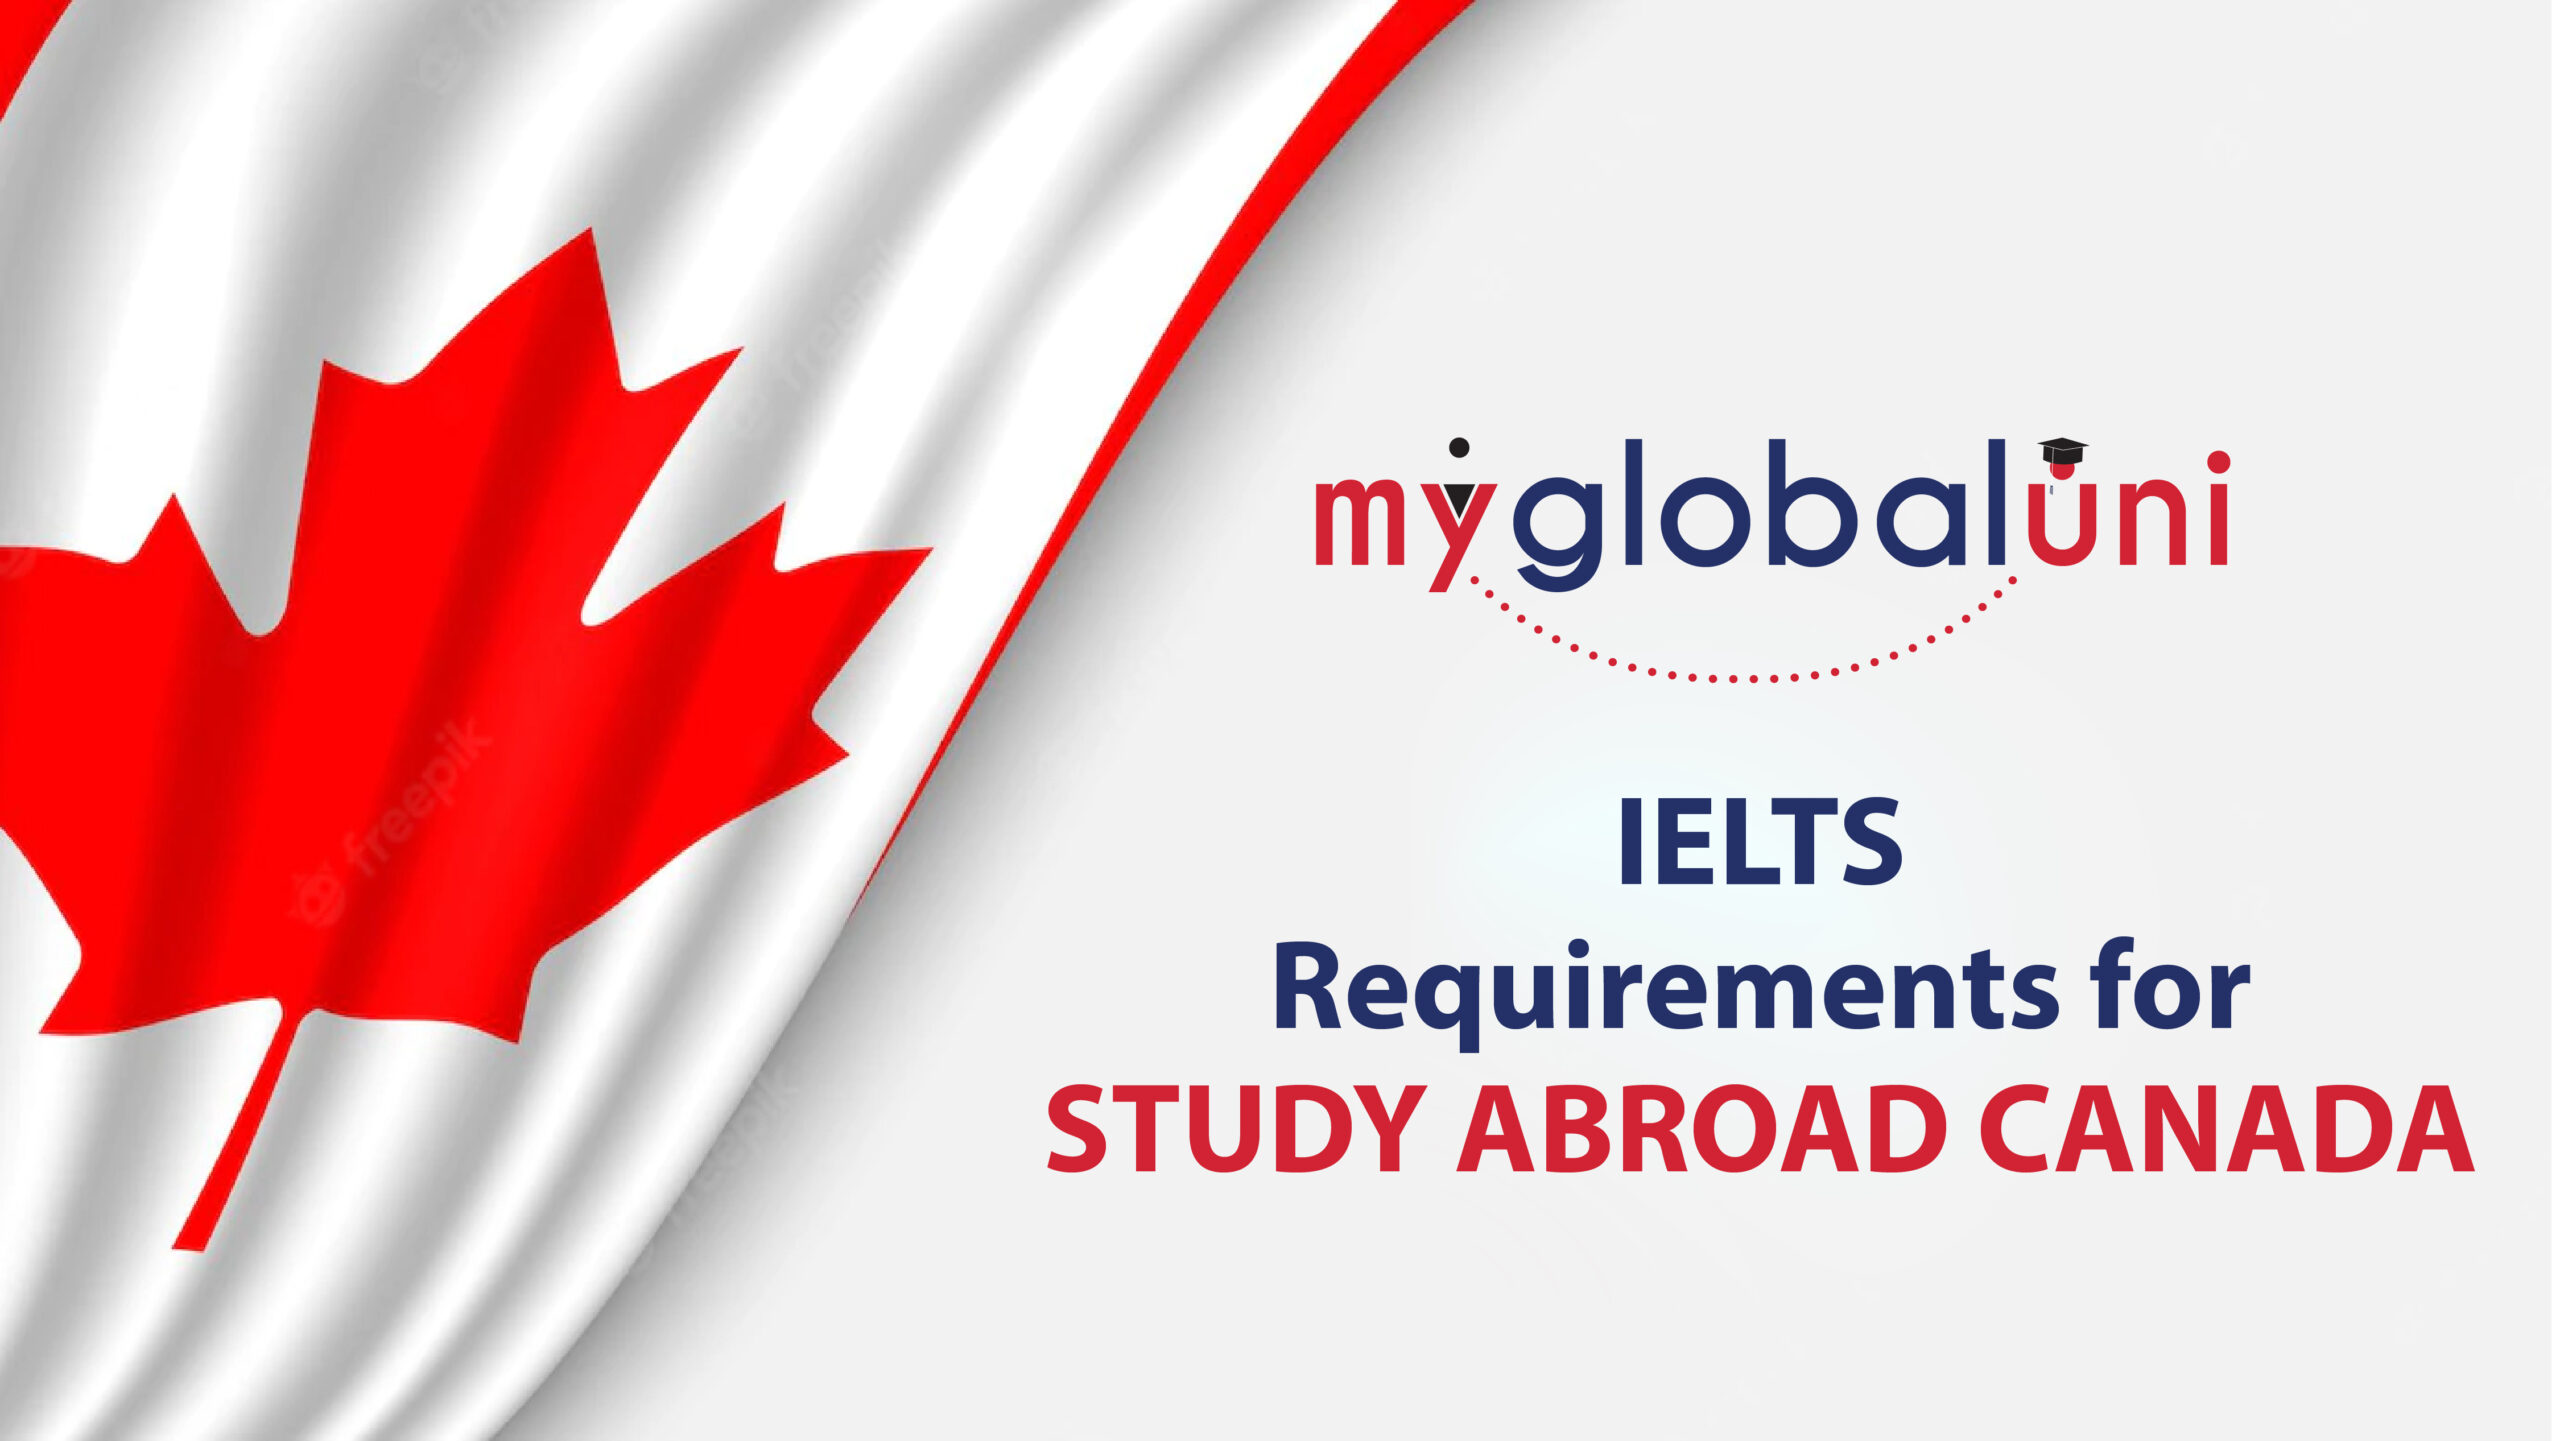 IELTS Requirements for Study Abroad Canada